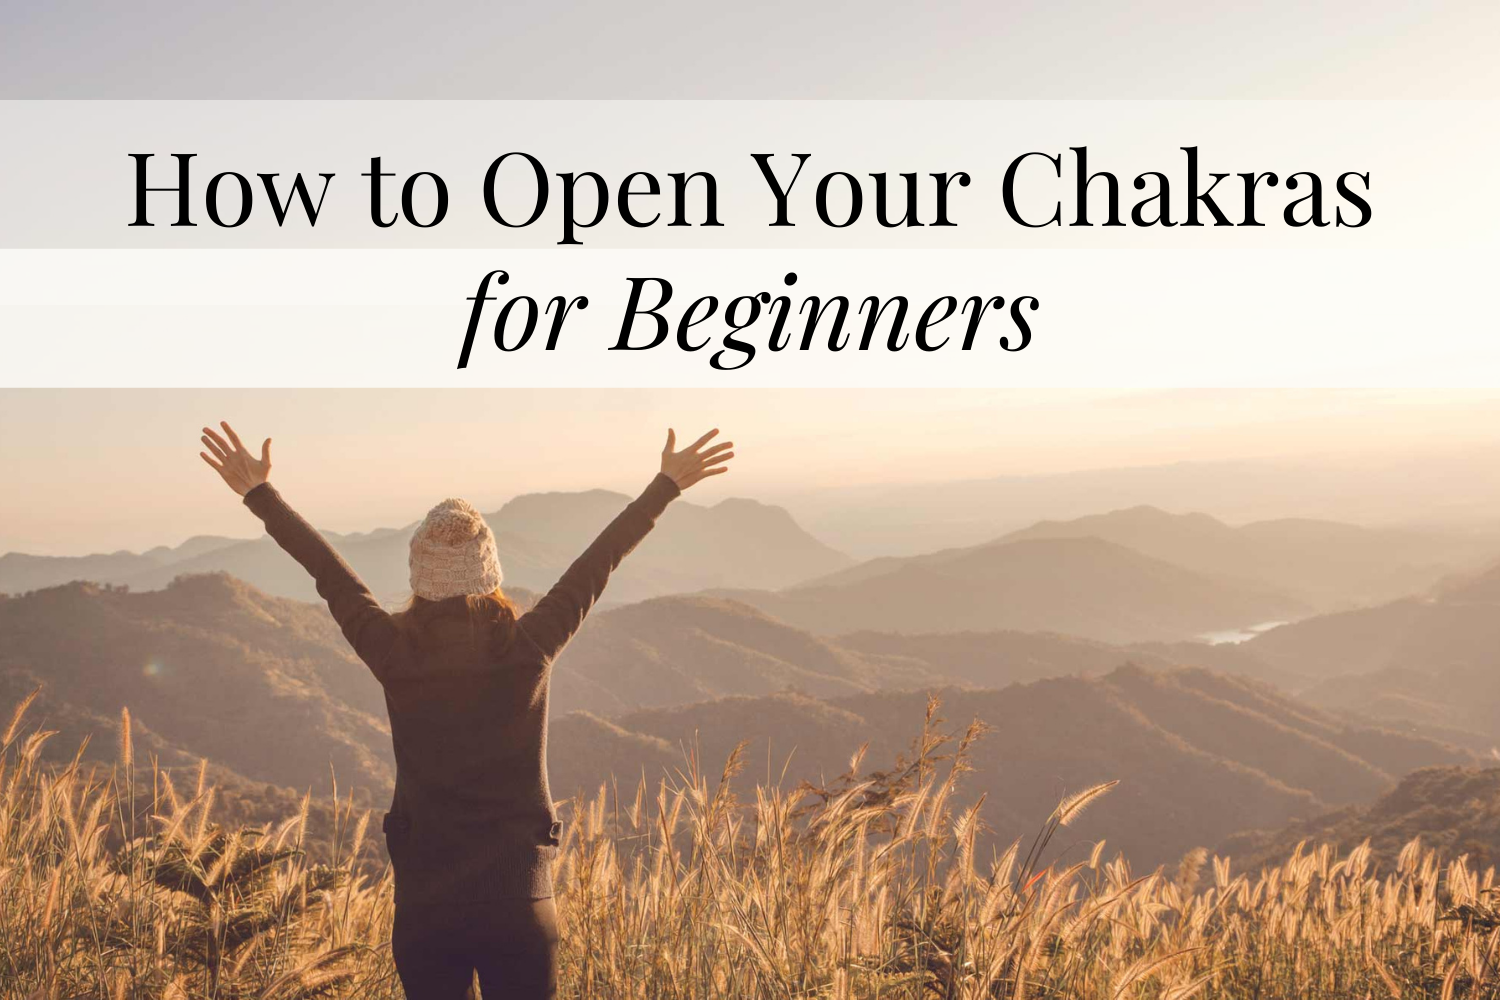 How to Open Your Chakras For Beginners